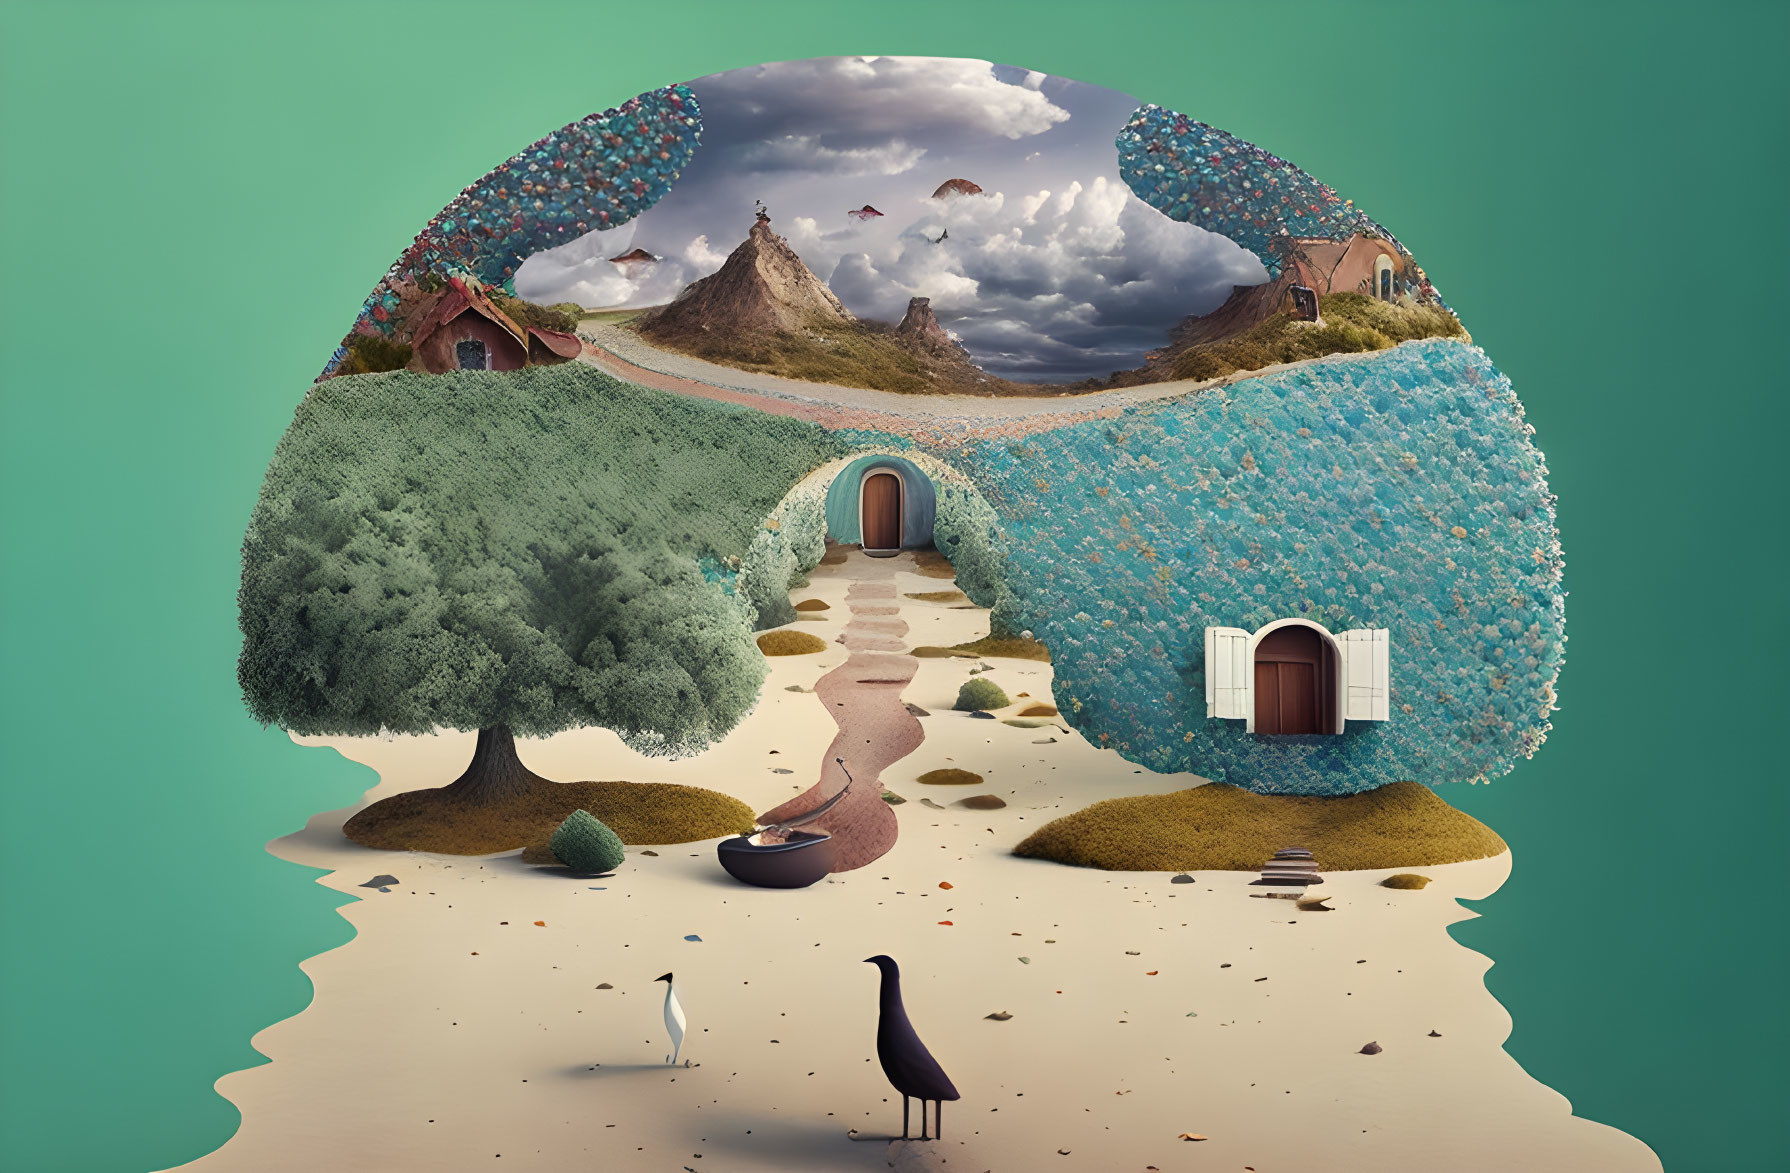 Surreal landscape with whimsical houses, tree, tunnel, and bird in a cloudy sky